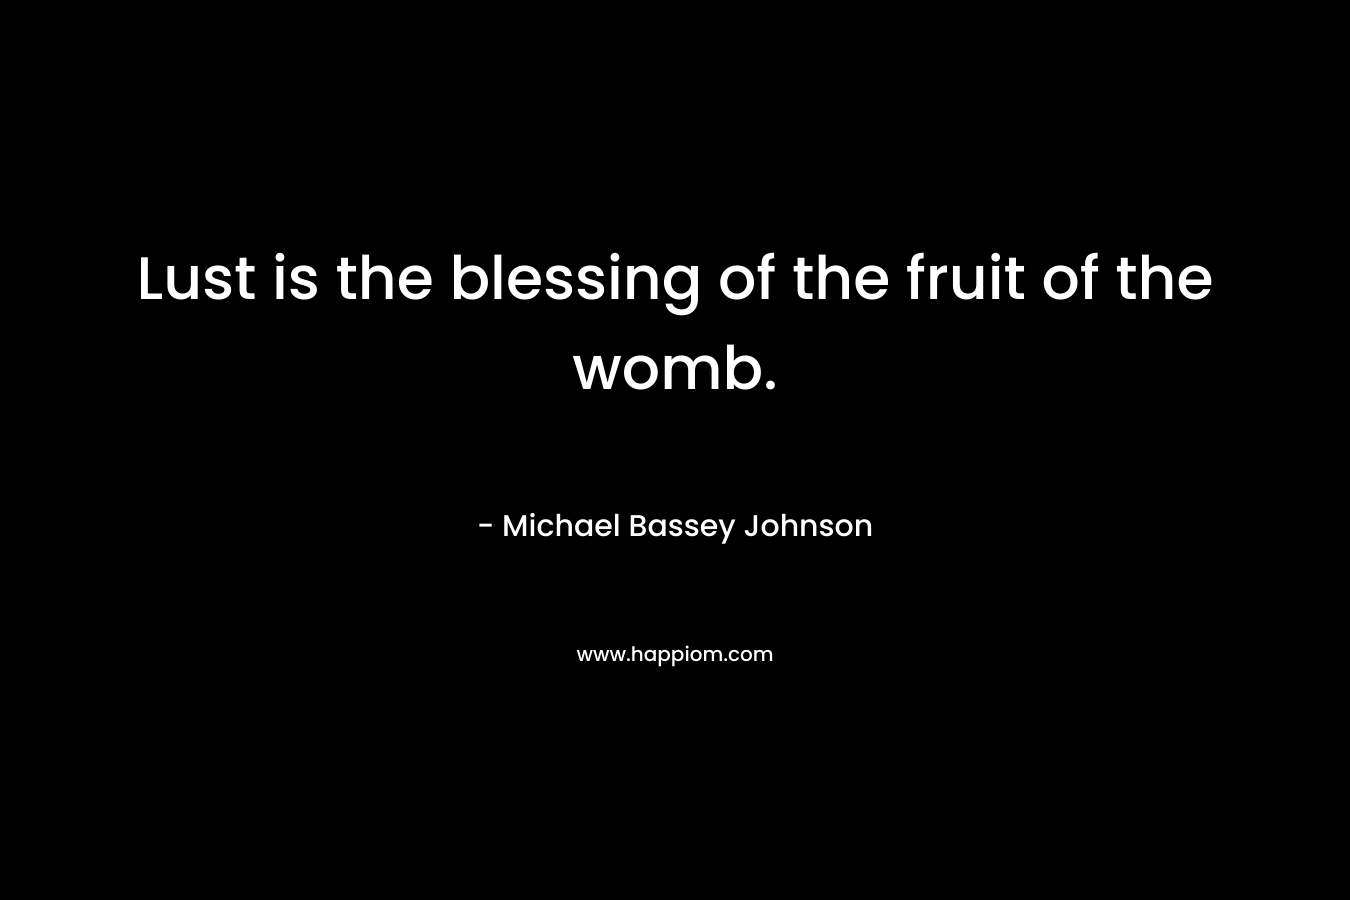 Lust is the blessing of the fruit of the womb. – Michael Bassey Johnson